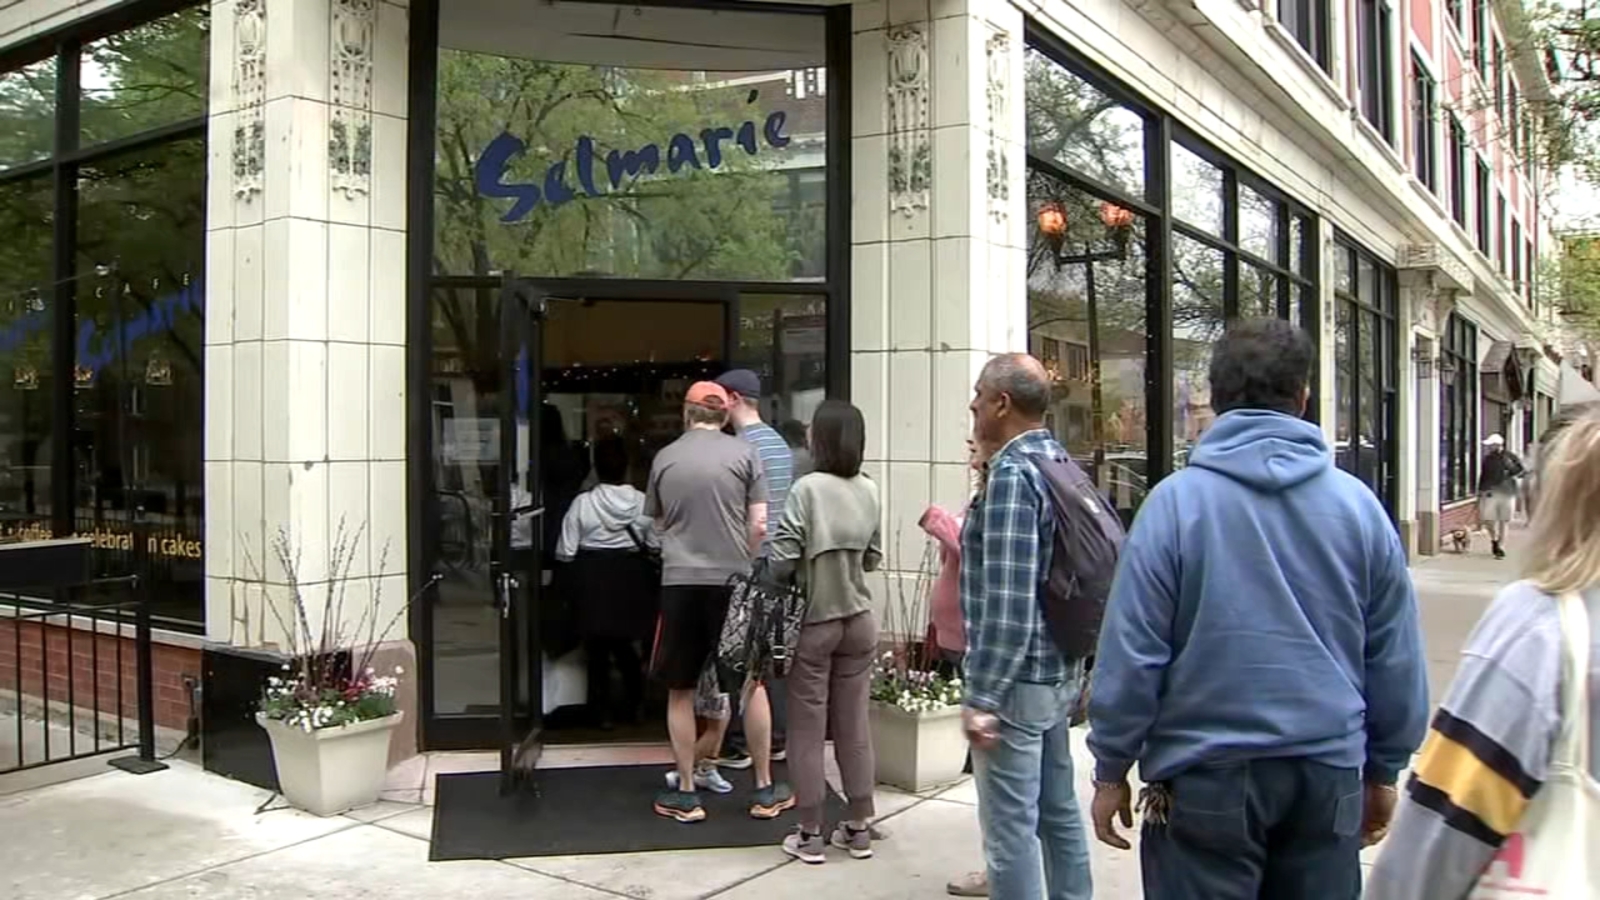 Caf Selmarie closes after more than 40 years in business in Lincoln Square, Chicago as owner Birgit Kobayashi retires [Video]